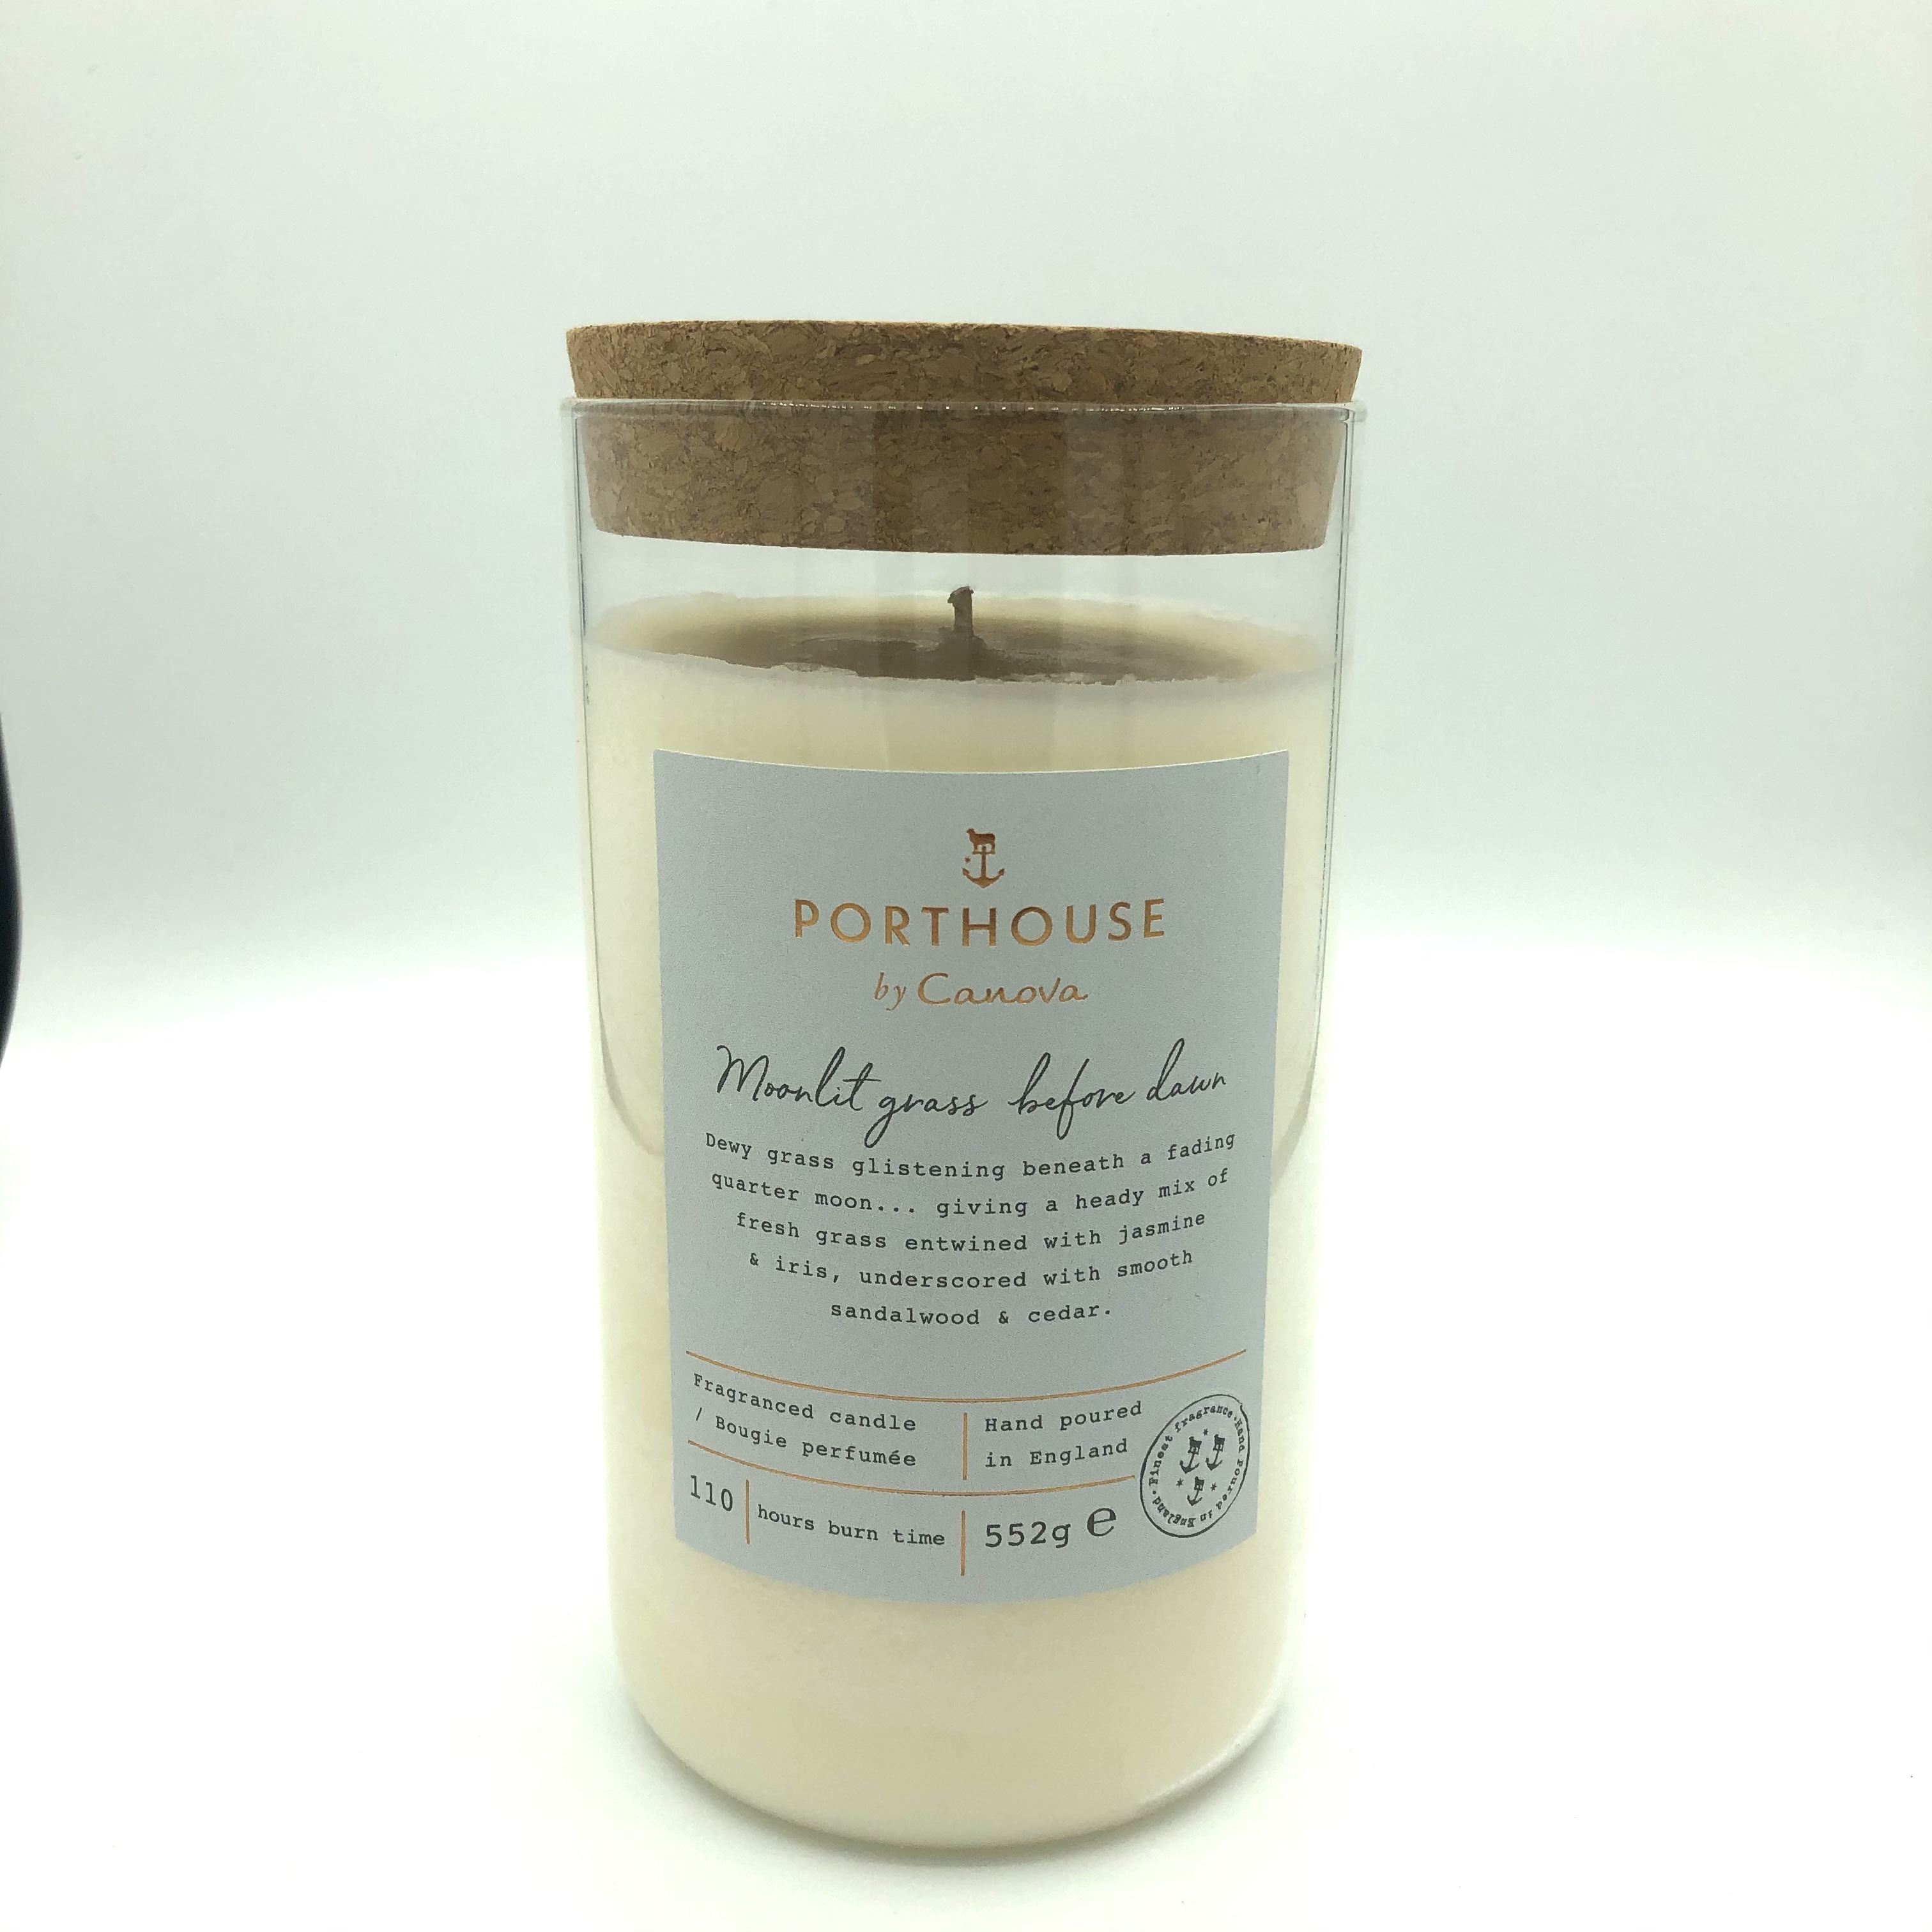 Canova Porthouse Moonlit Grass Before Dawn Candle 552g 110 Hours Burn Time